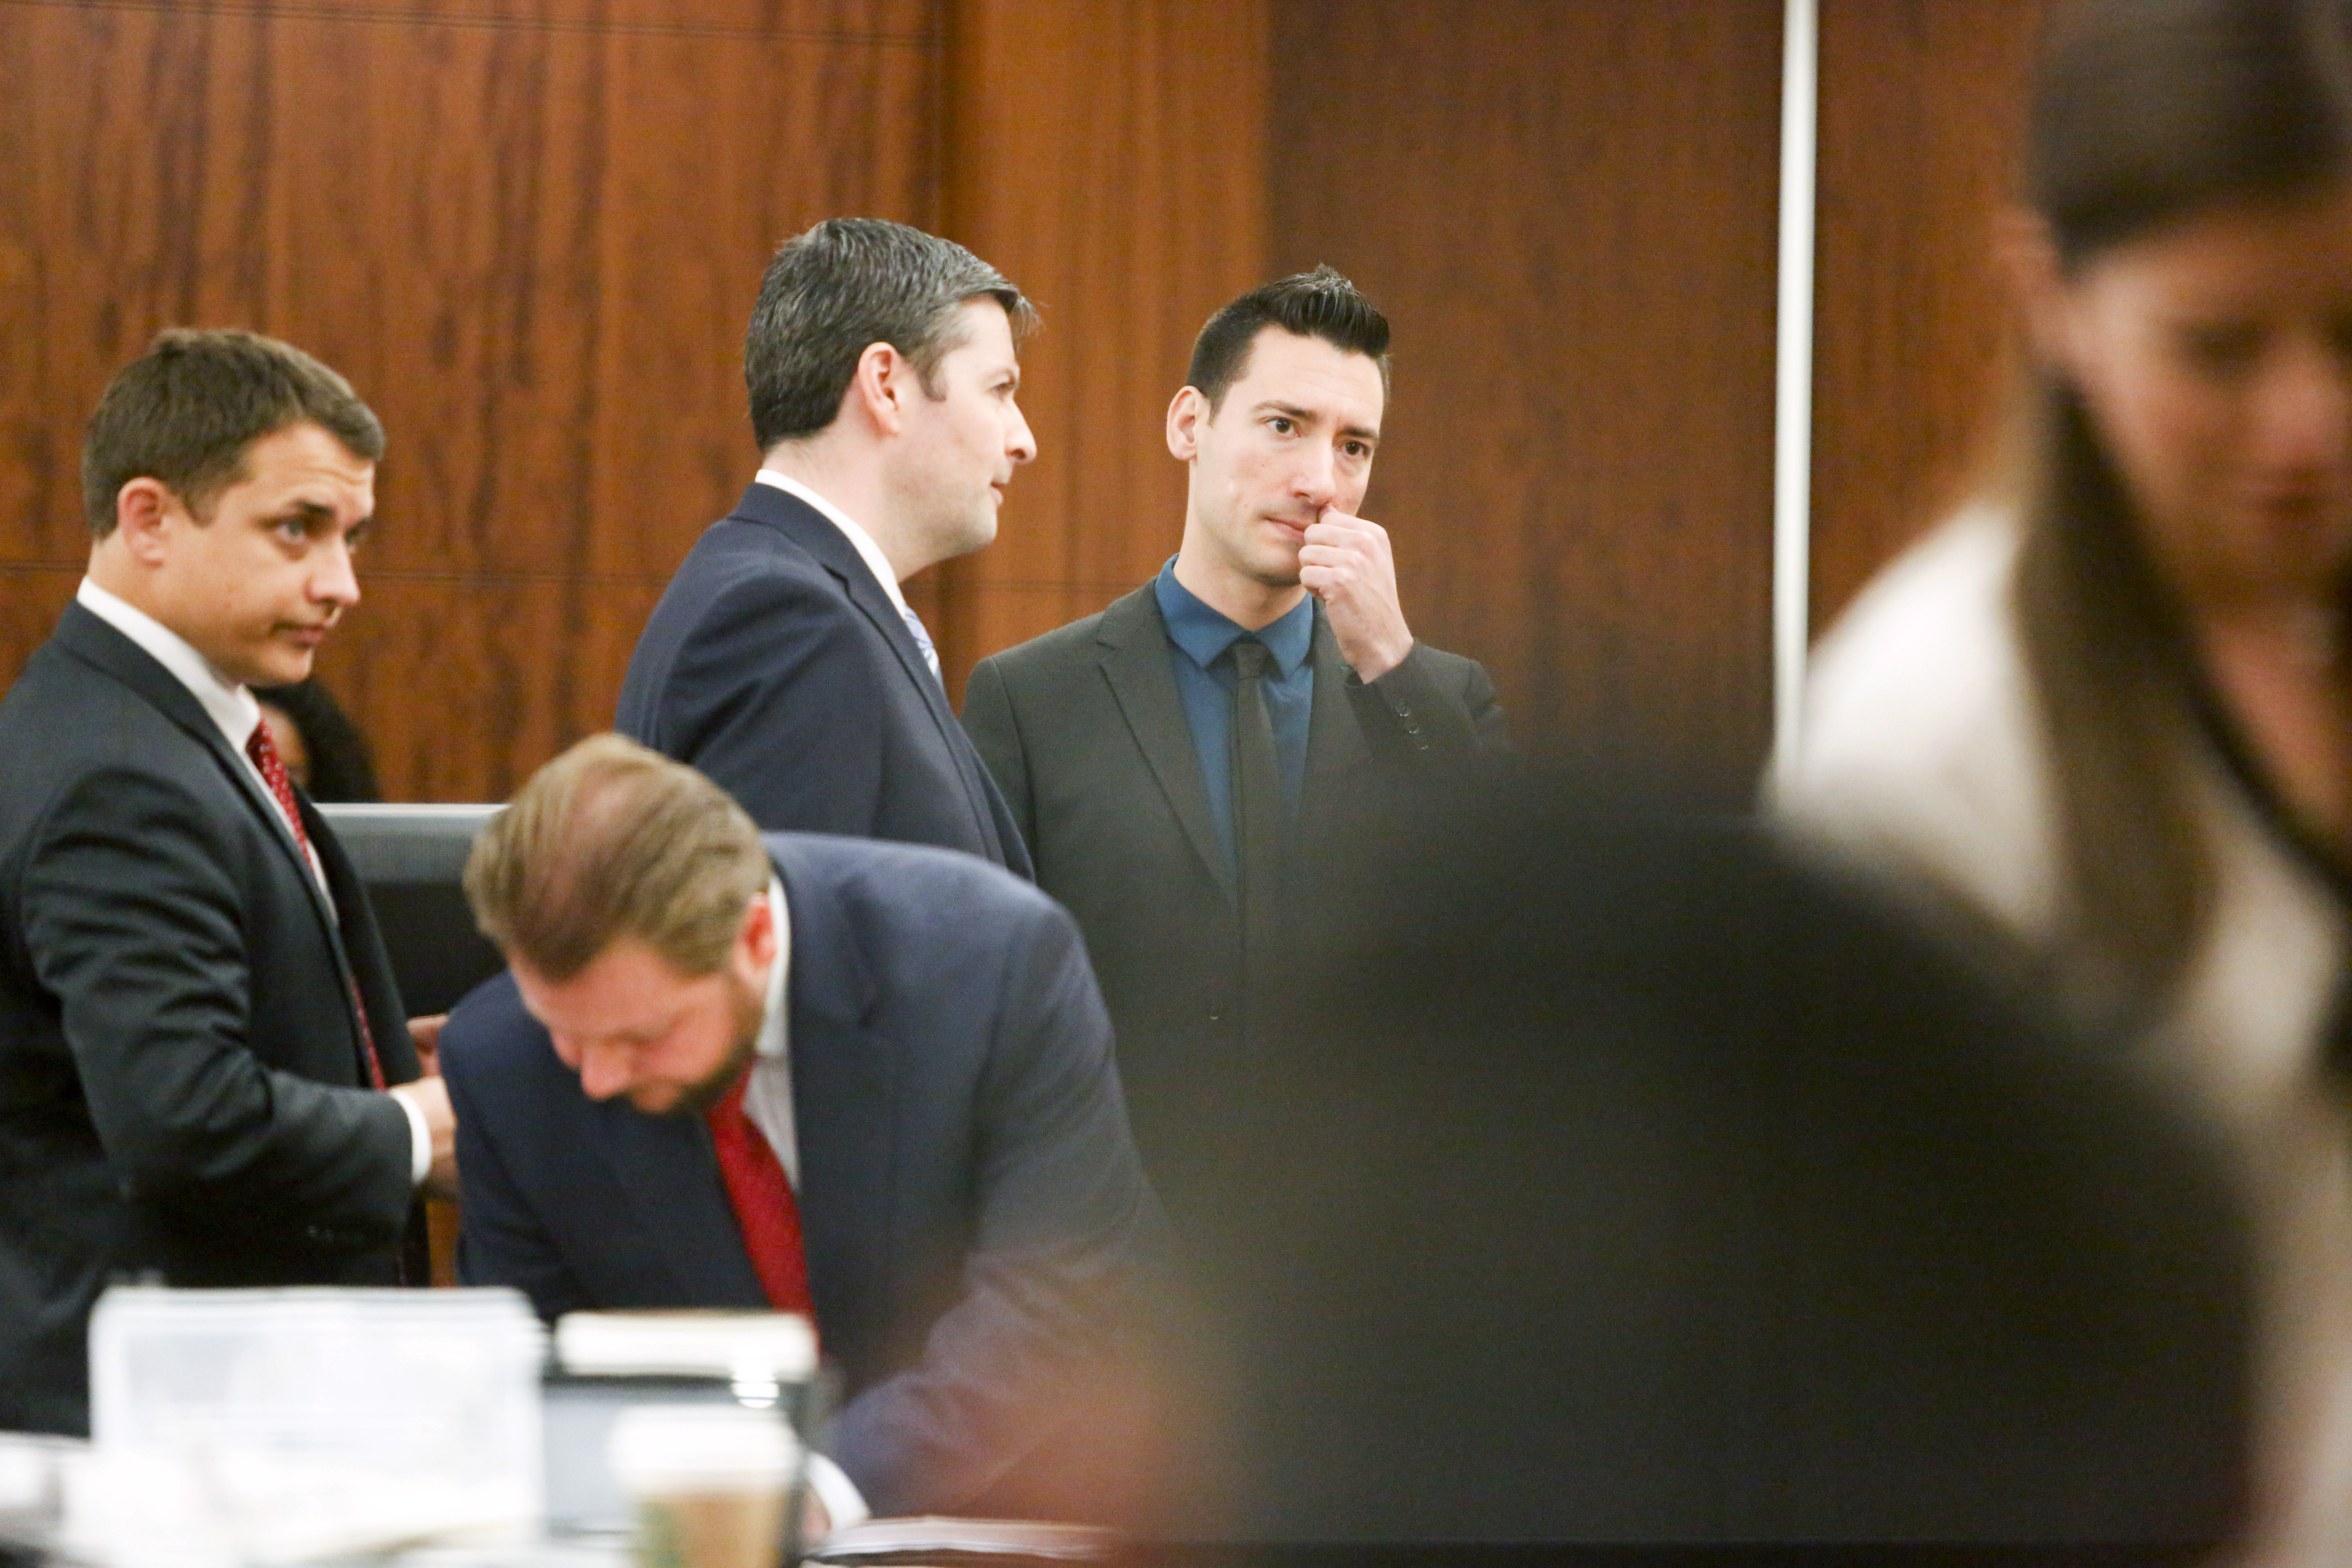 David Daleiden (C), a defendant in an indictment stemming from a Planned Parenthood video he helped produce, appears in court on February 4, 2016. (Eric Kayne/Getty Images)